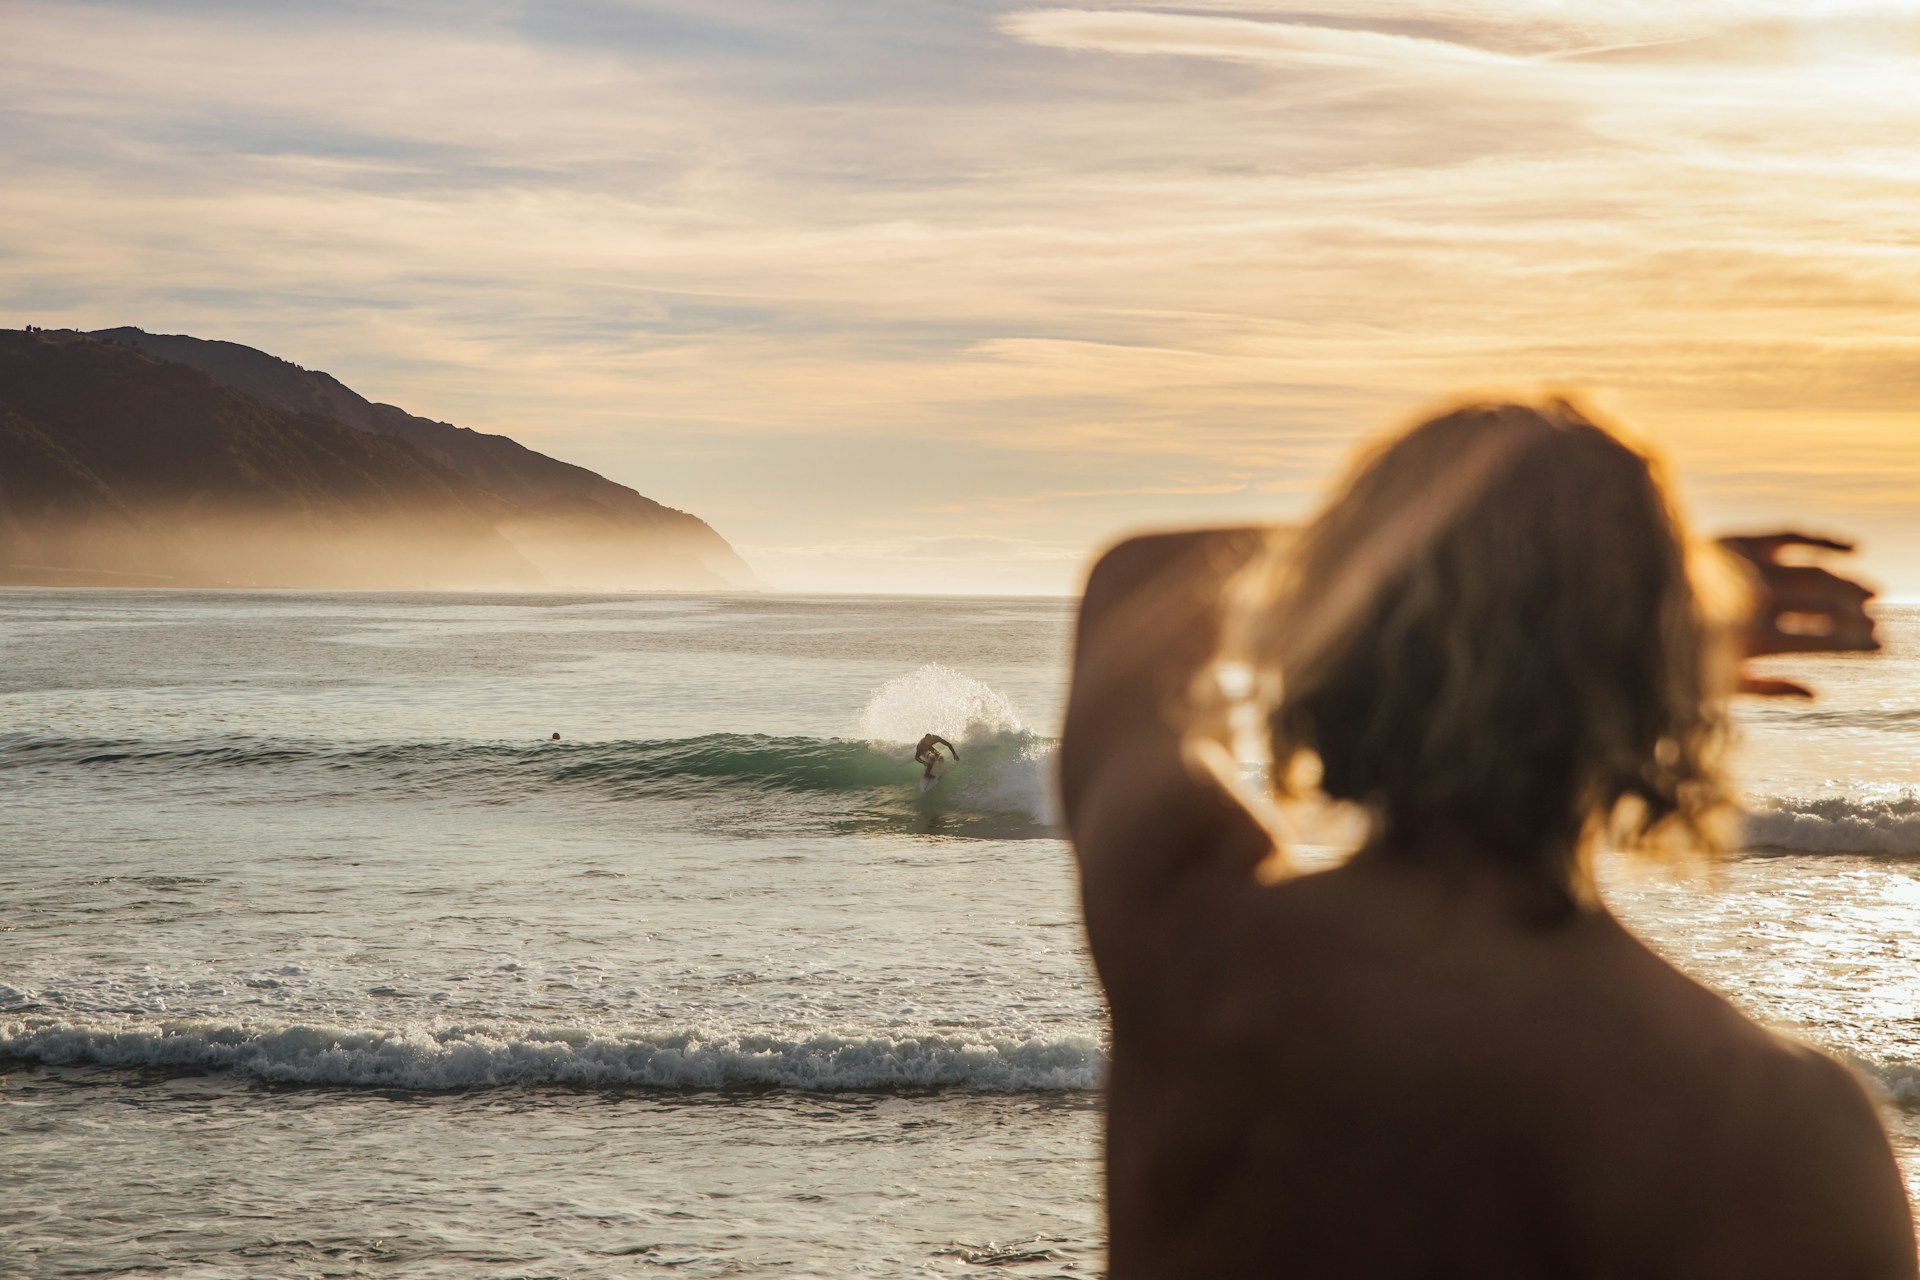 photo - a person looking at the sunrise or sunset at the beach with beautiful view of waves and someone surfing on the Best Surfing in Hawaii for Beginners Waves